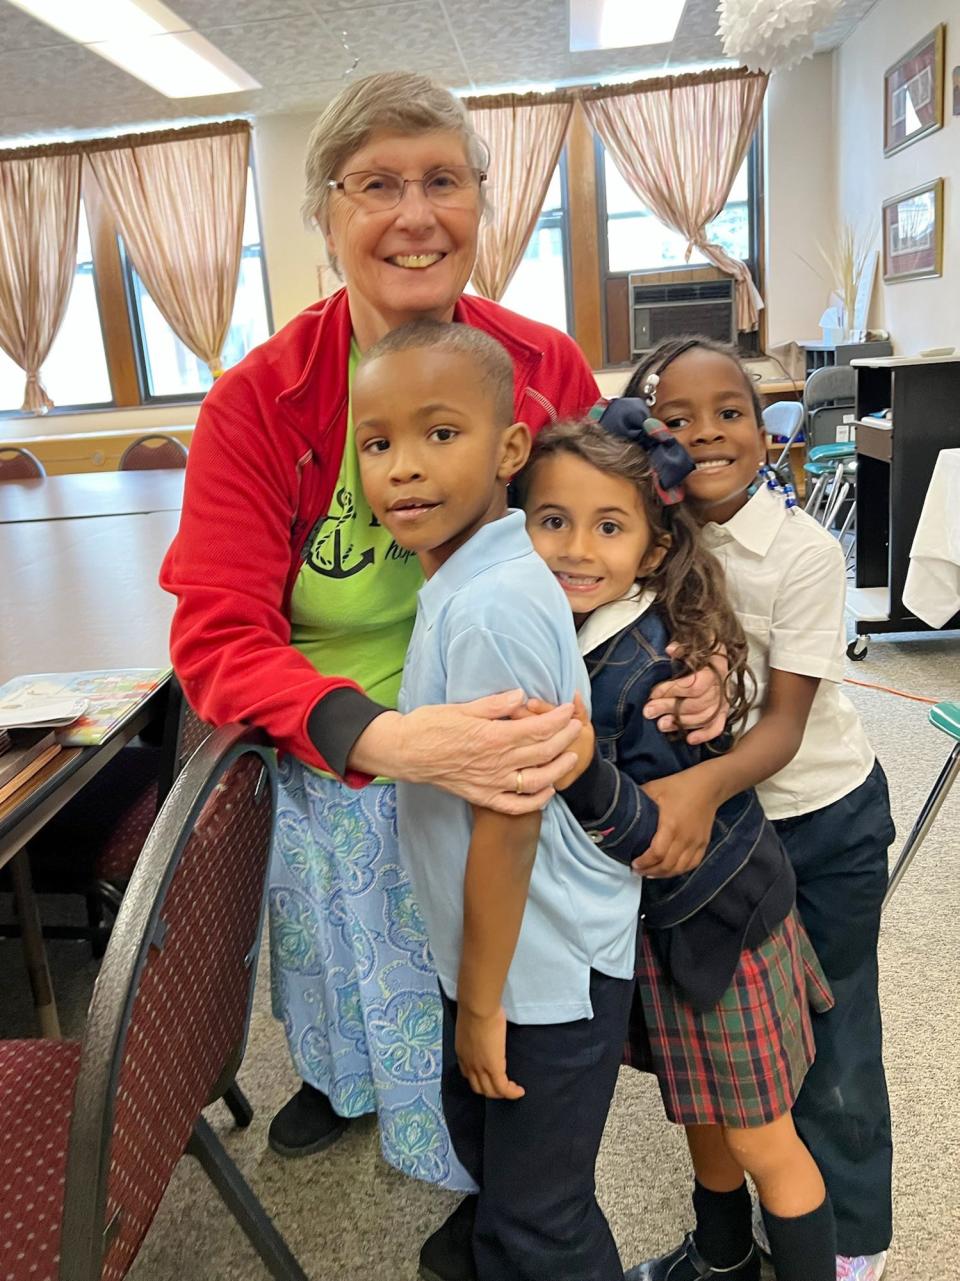 Sister Kathy Avery, 80, former principal at St. Clare of Montefalco Catholic School in Grosse Pointe Park, embraces three students at the start of the 2023 school year. She is leaving St. Clare after 16 years of service and moving back to her motherhouse in Omaha, Nebraska.